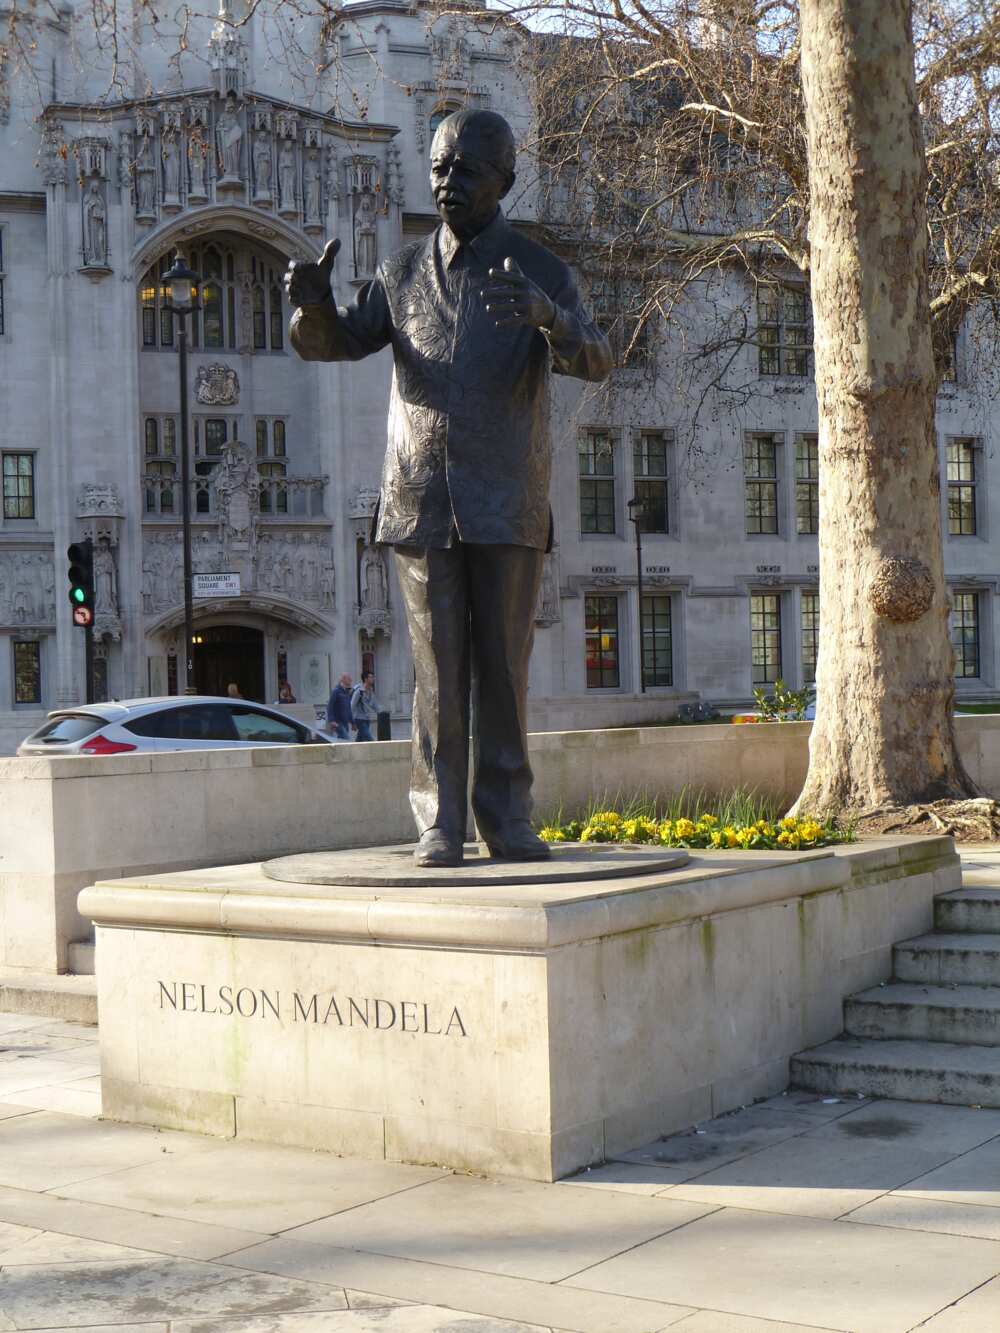 Britain's far-right demonstrators call for the removal of Mandela's statue